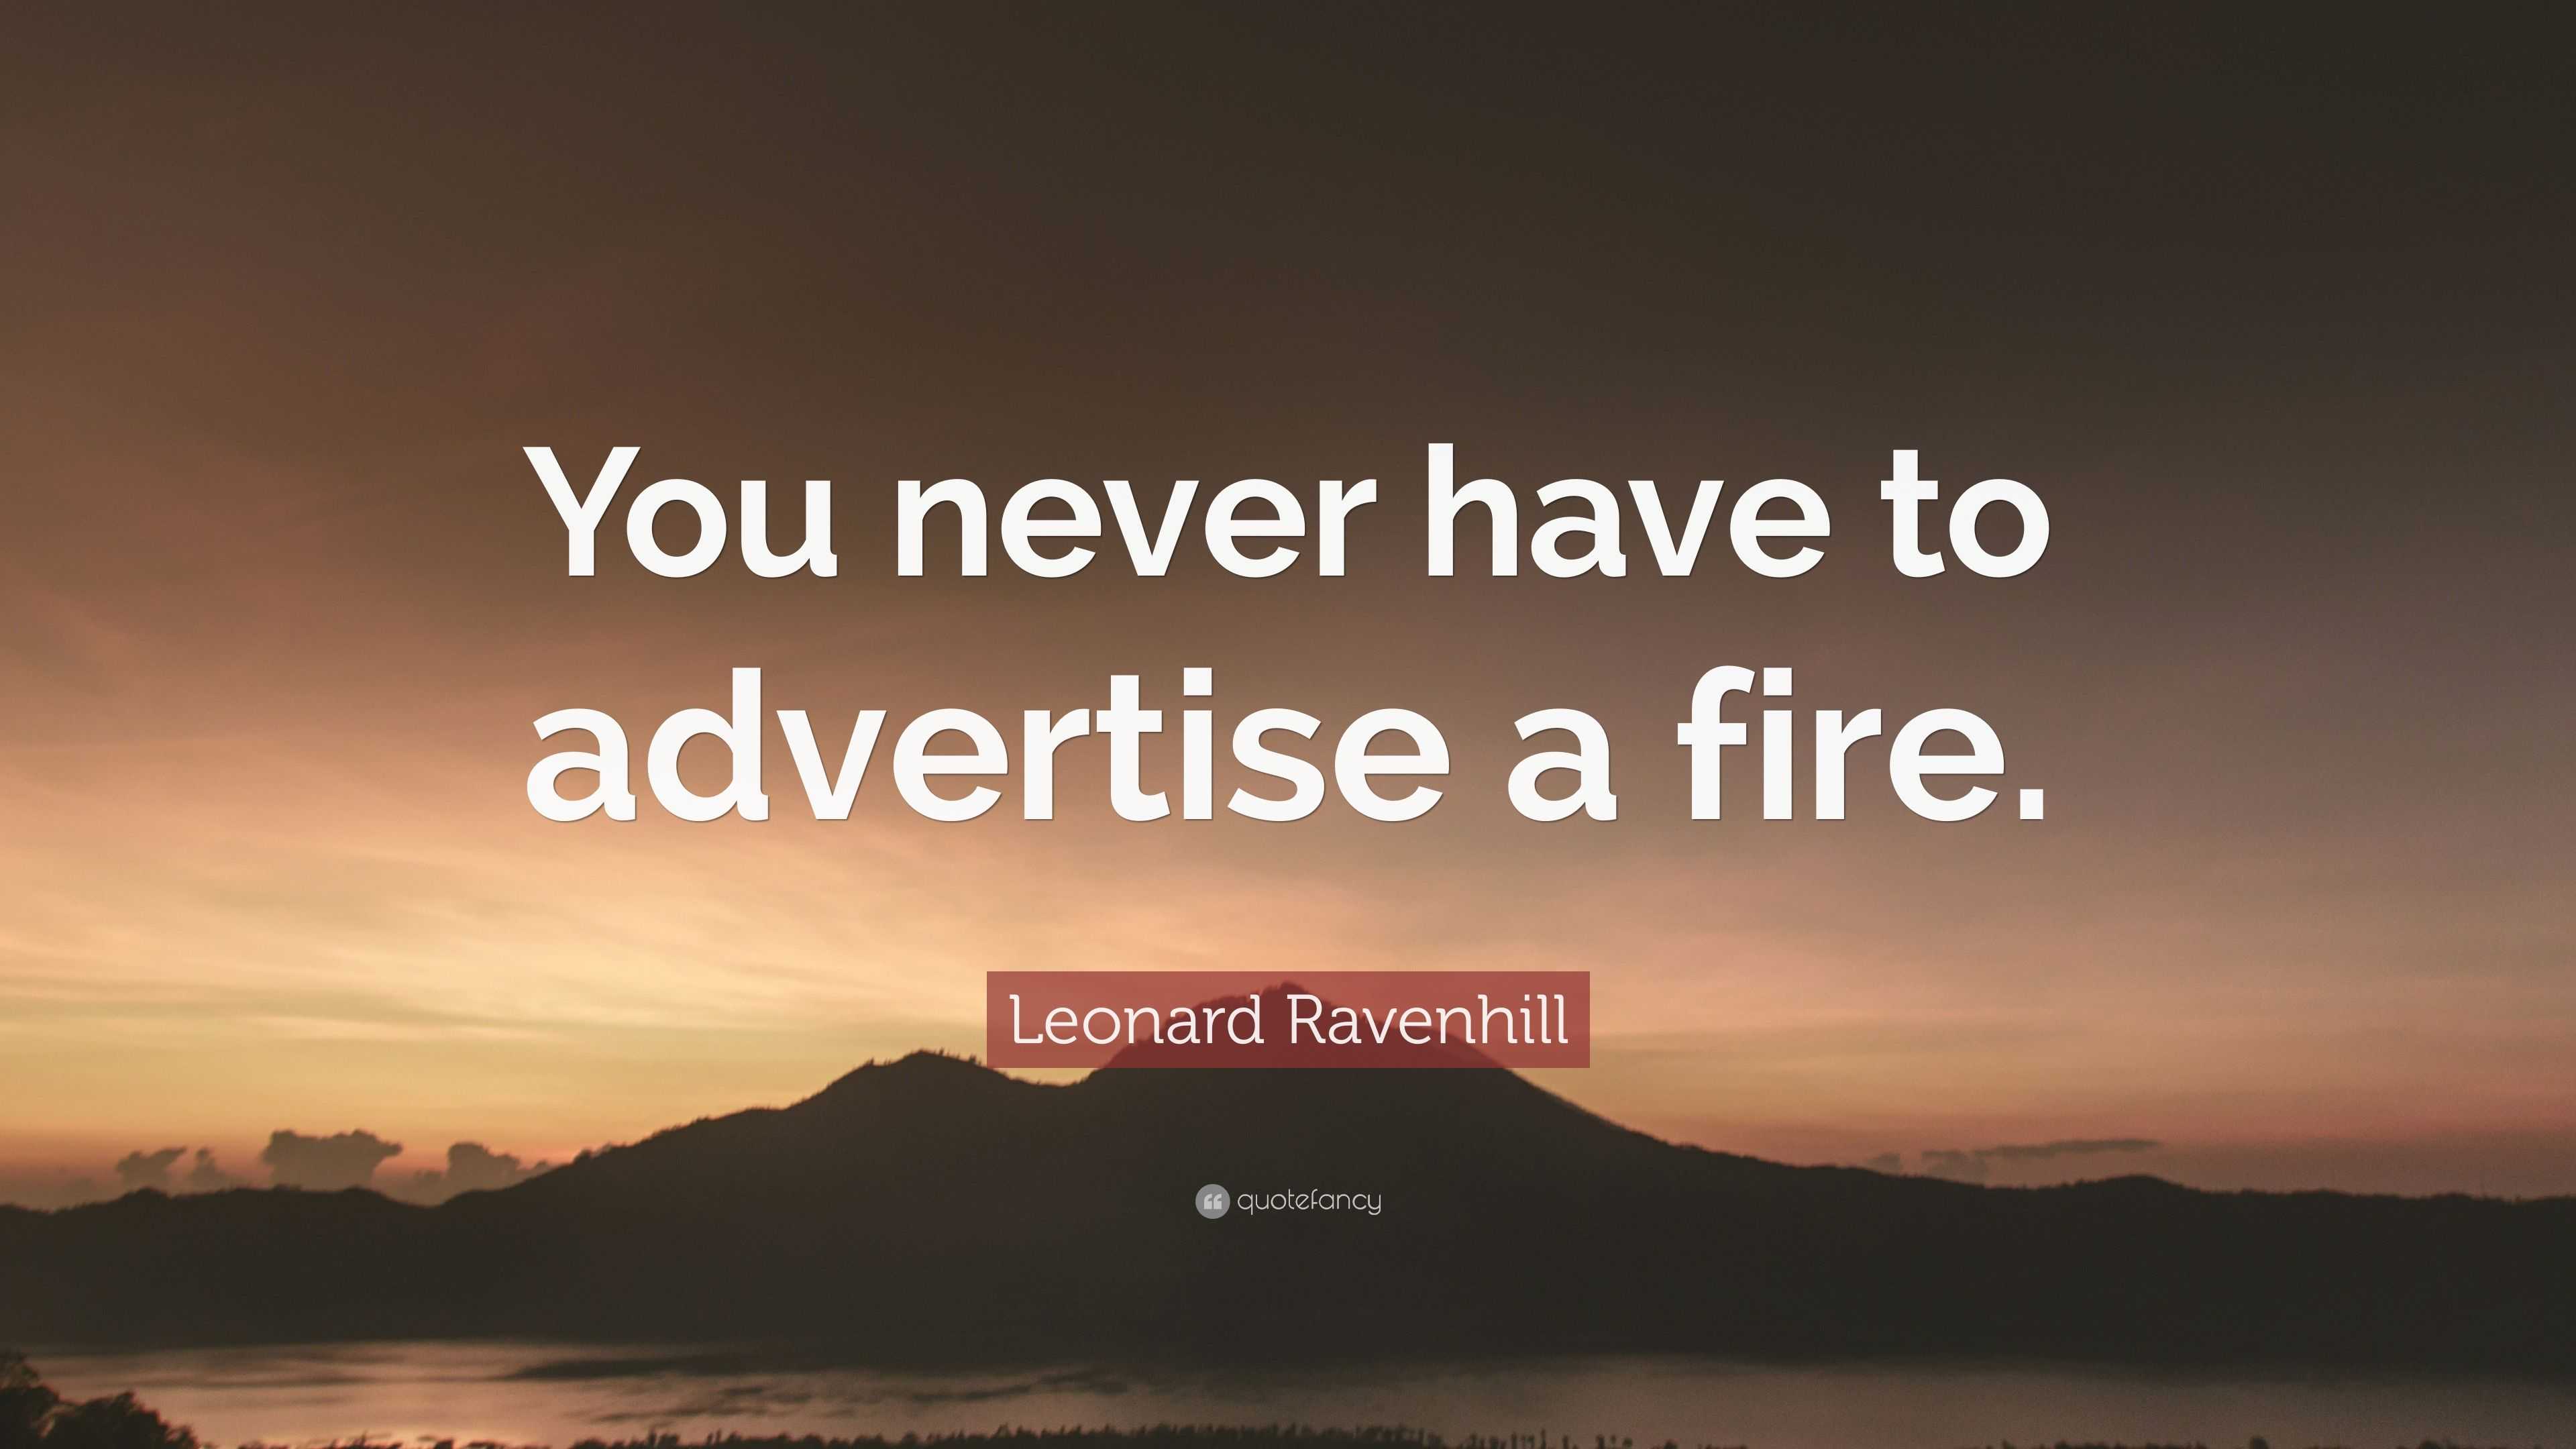 Leonard Ravenhill Quote: "You never have to advertise a ...